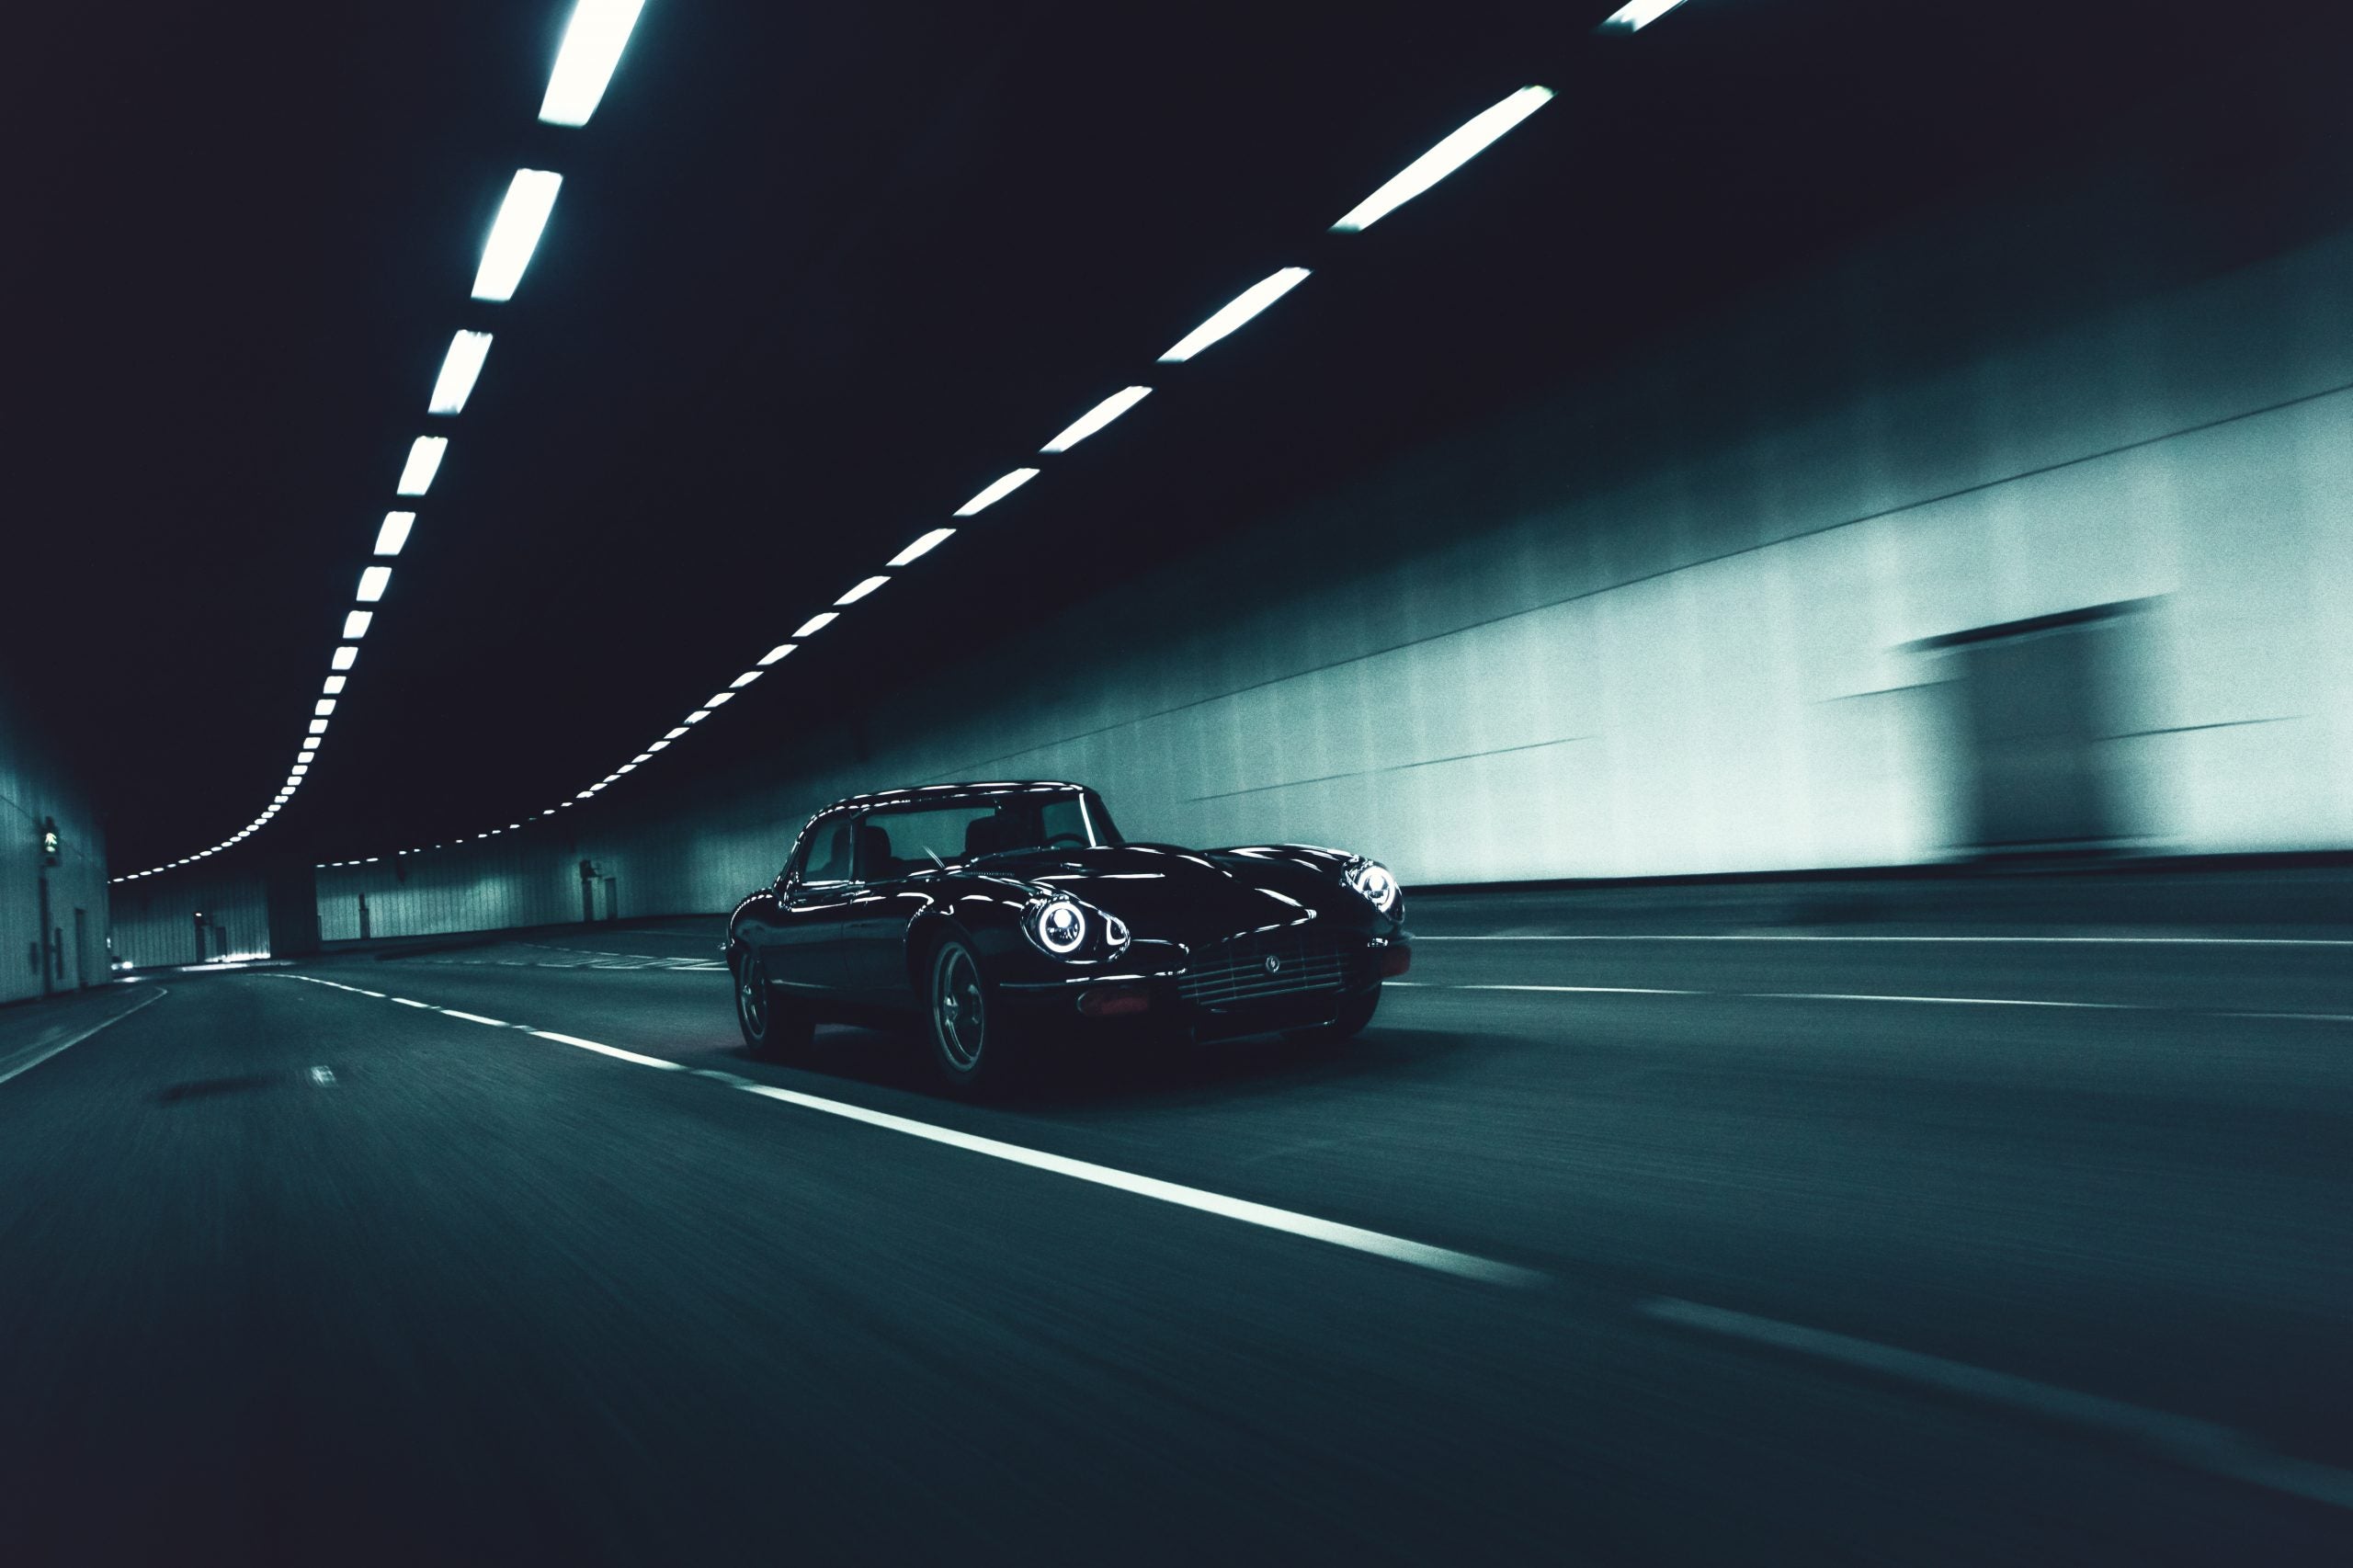 unleashed jaguar e-type at night in london